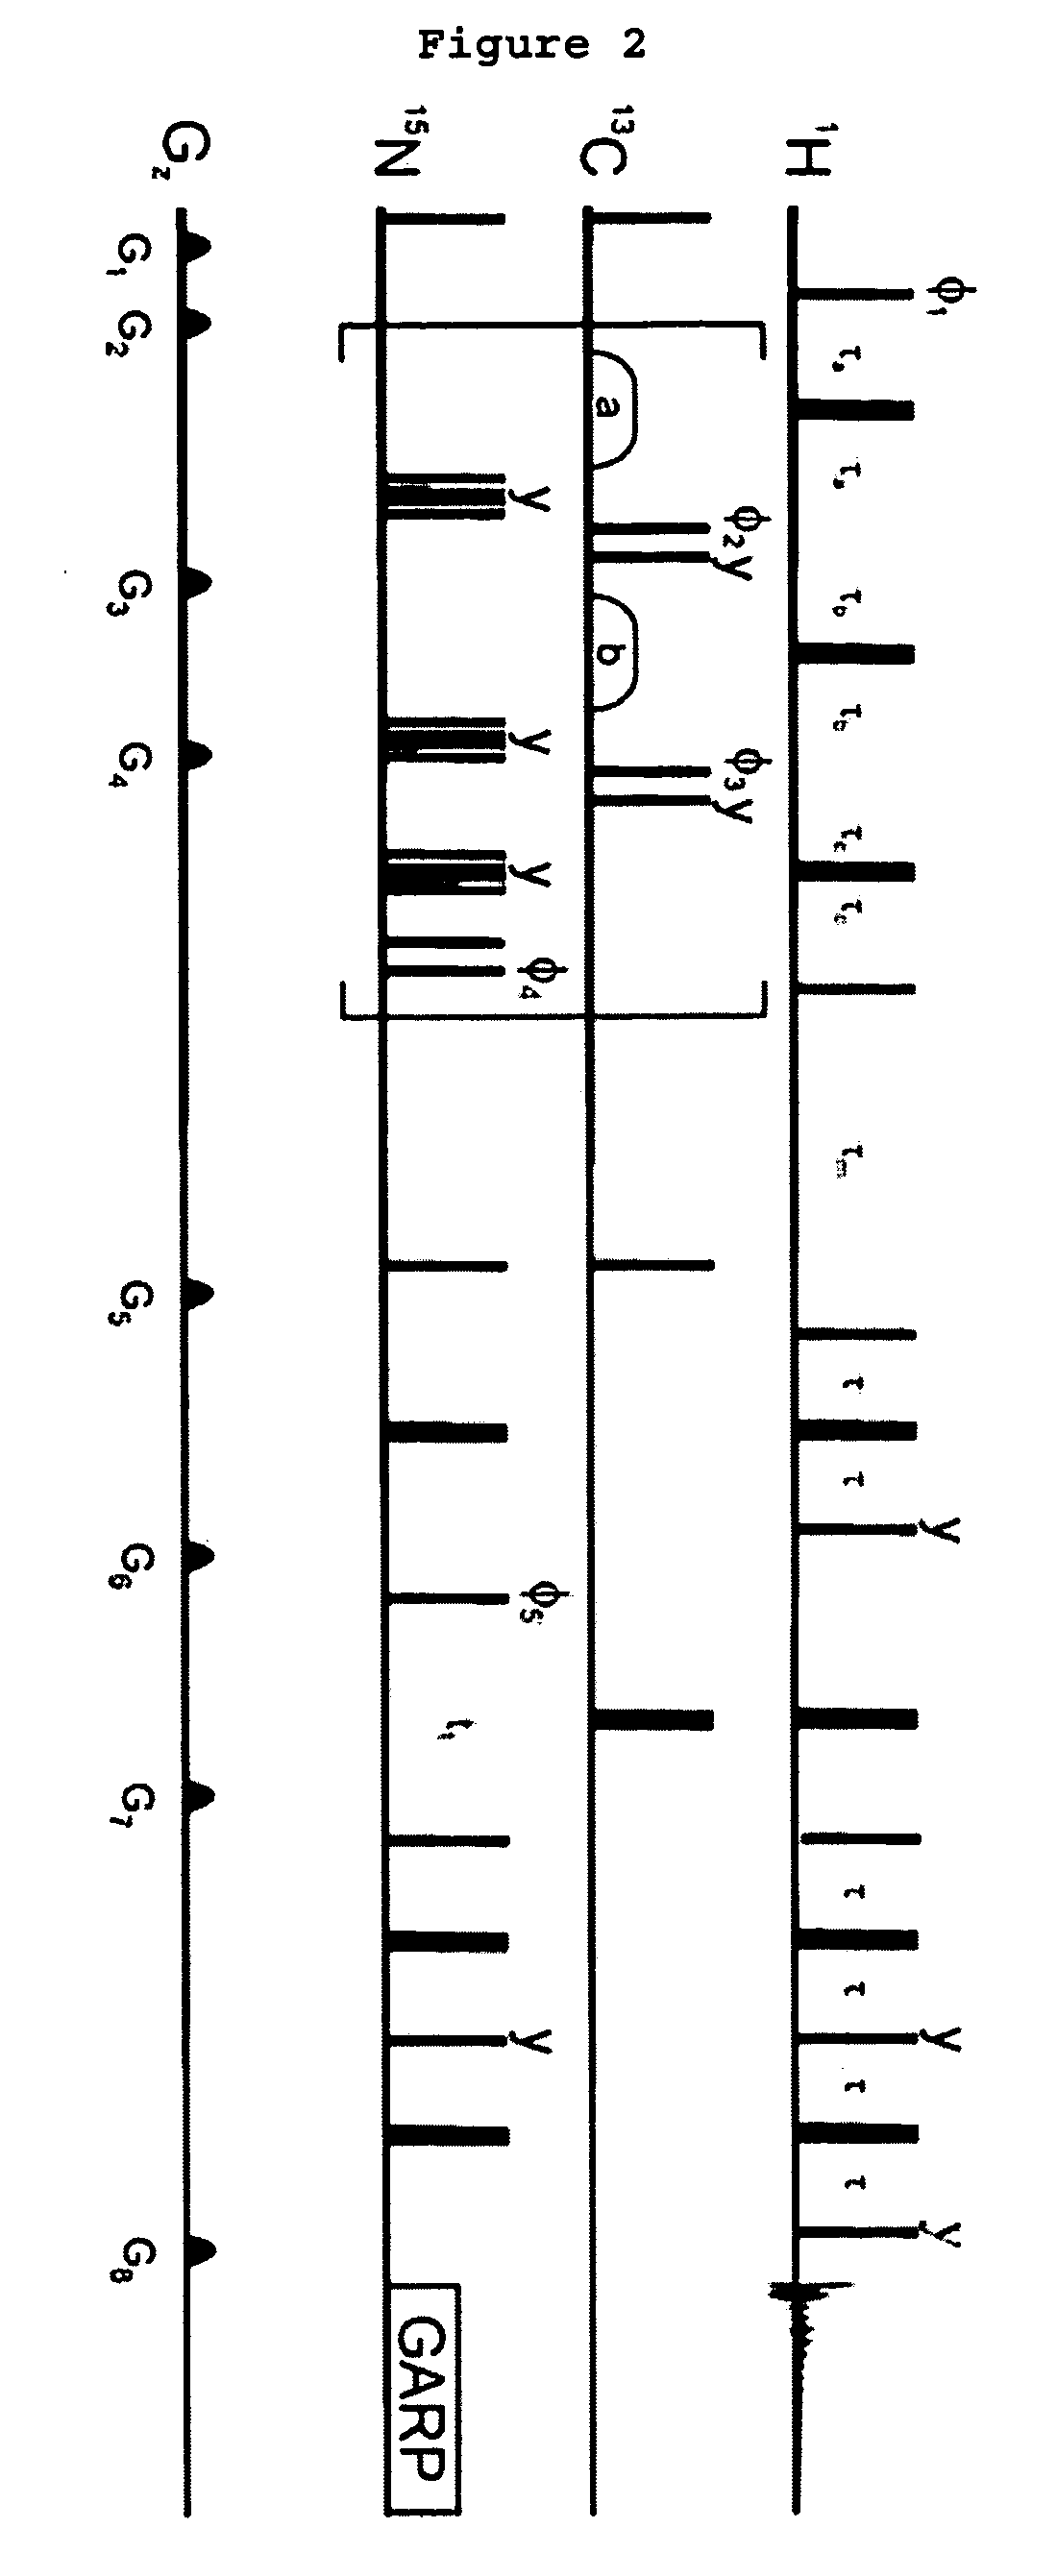 Methods and devices for characterizing macromolecular complexes using isotope labeling techniques